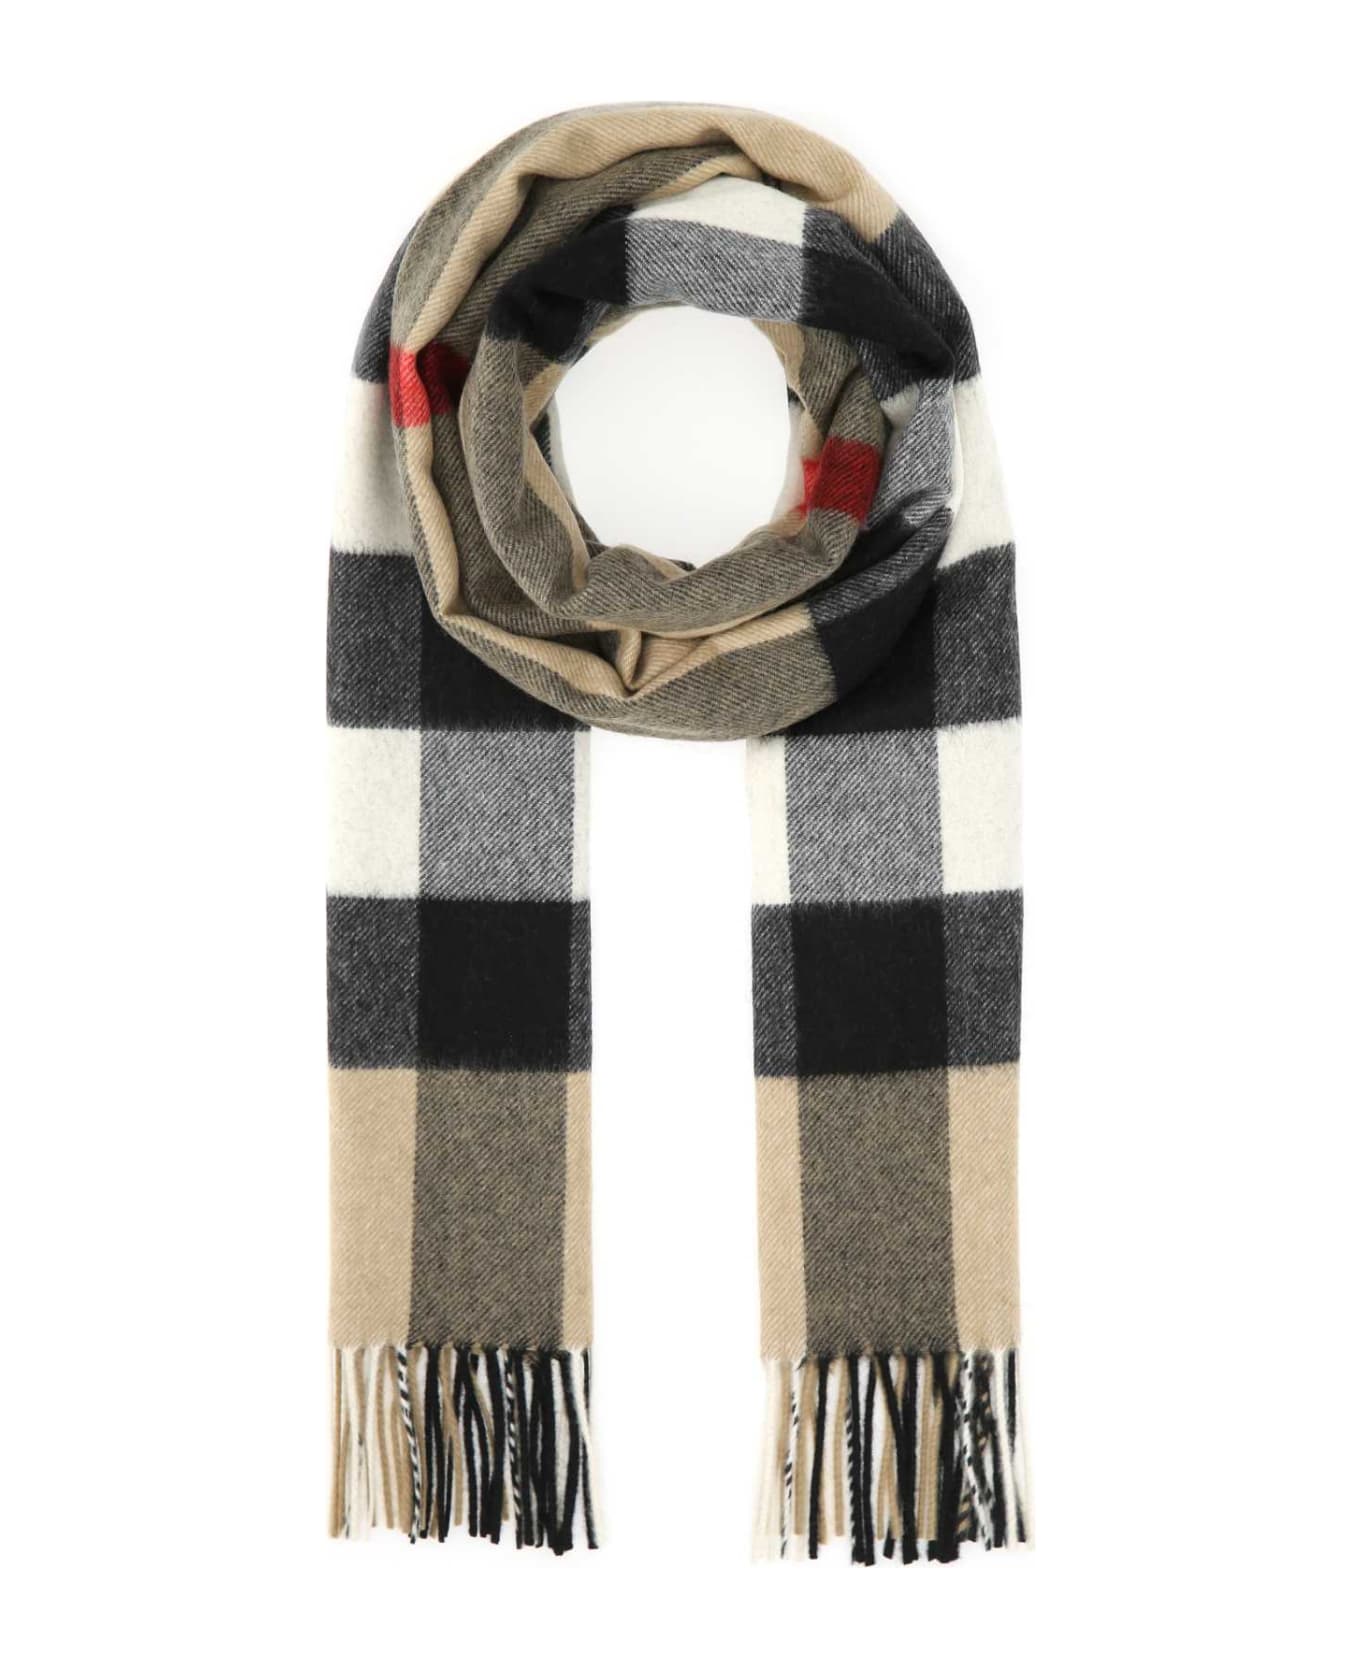 Burberry Embroidered Cashmere Scarf - A7026 スカーフ